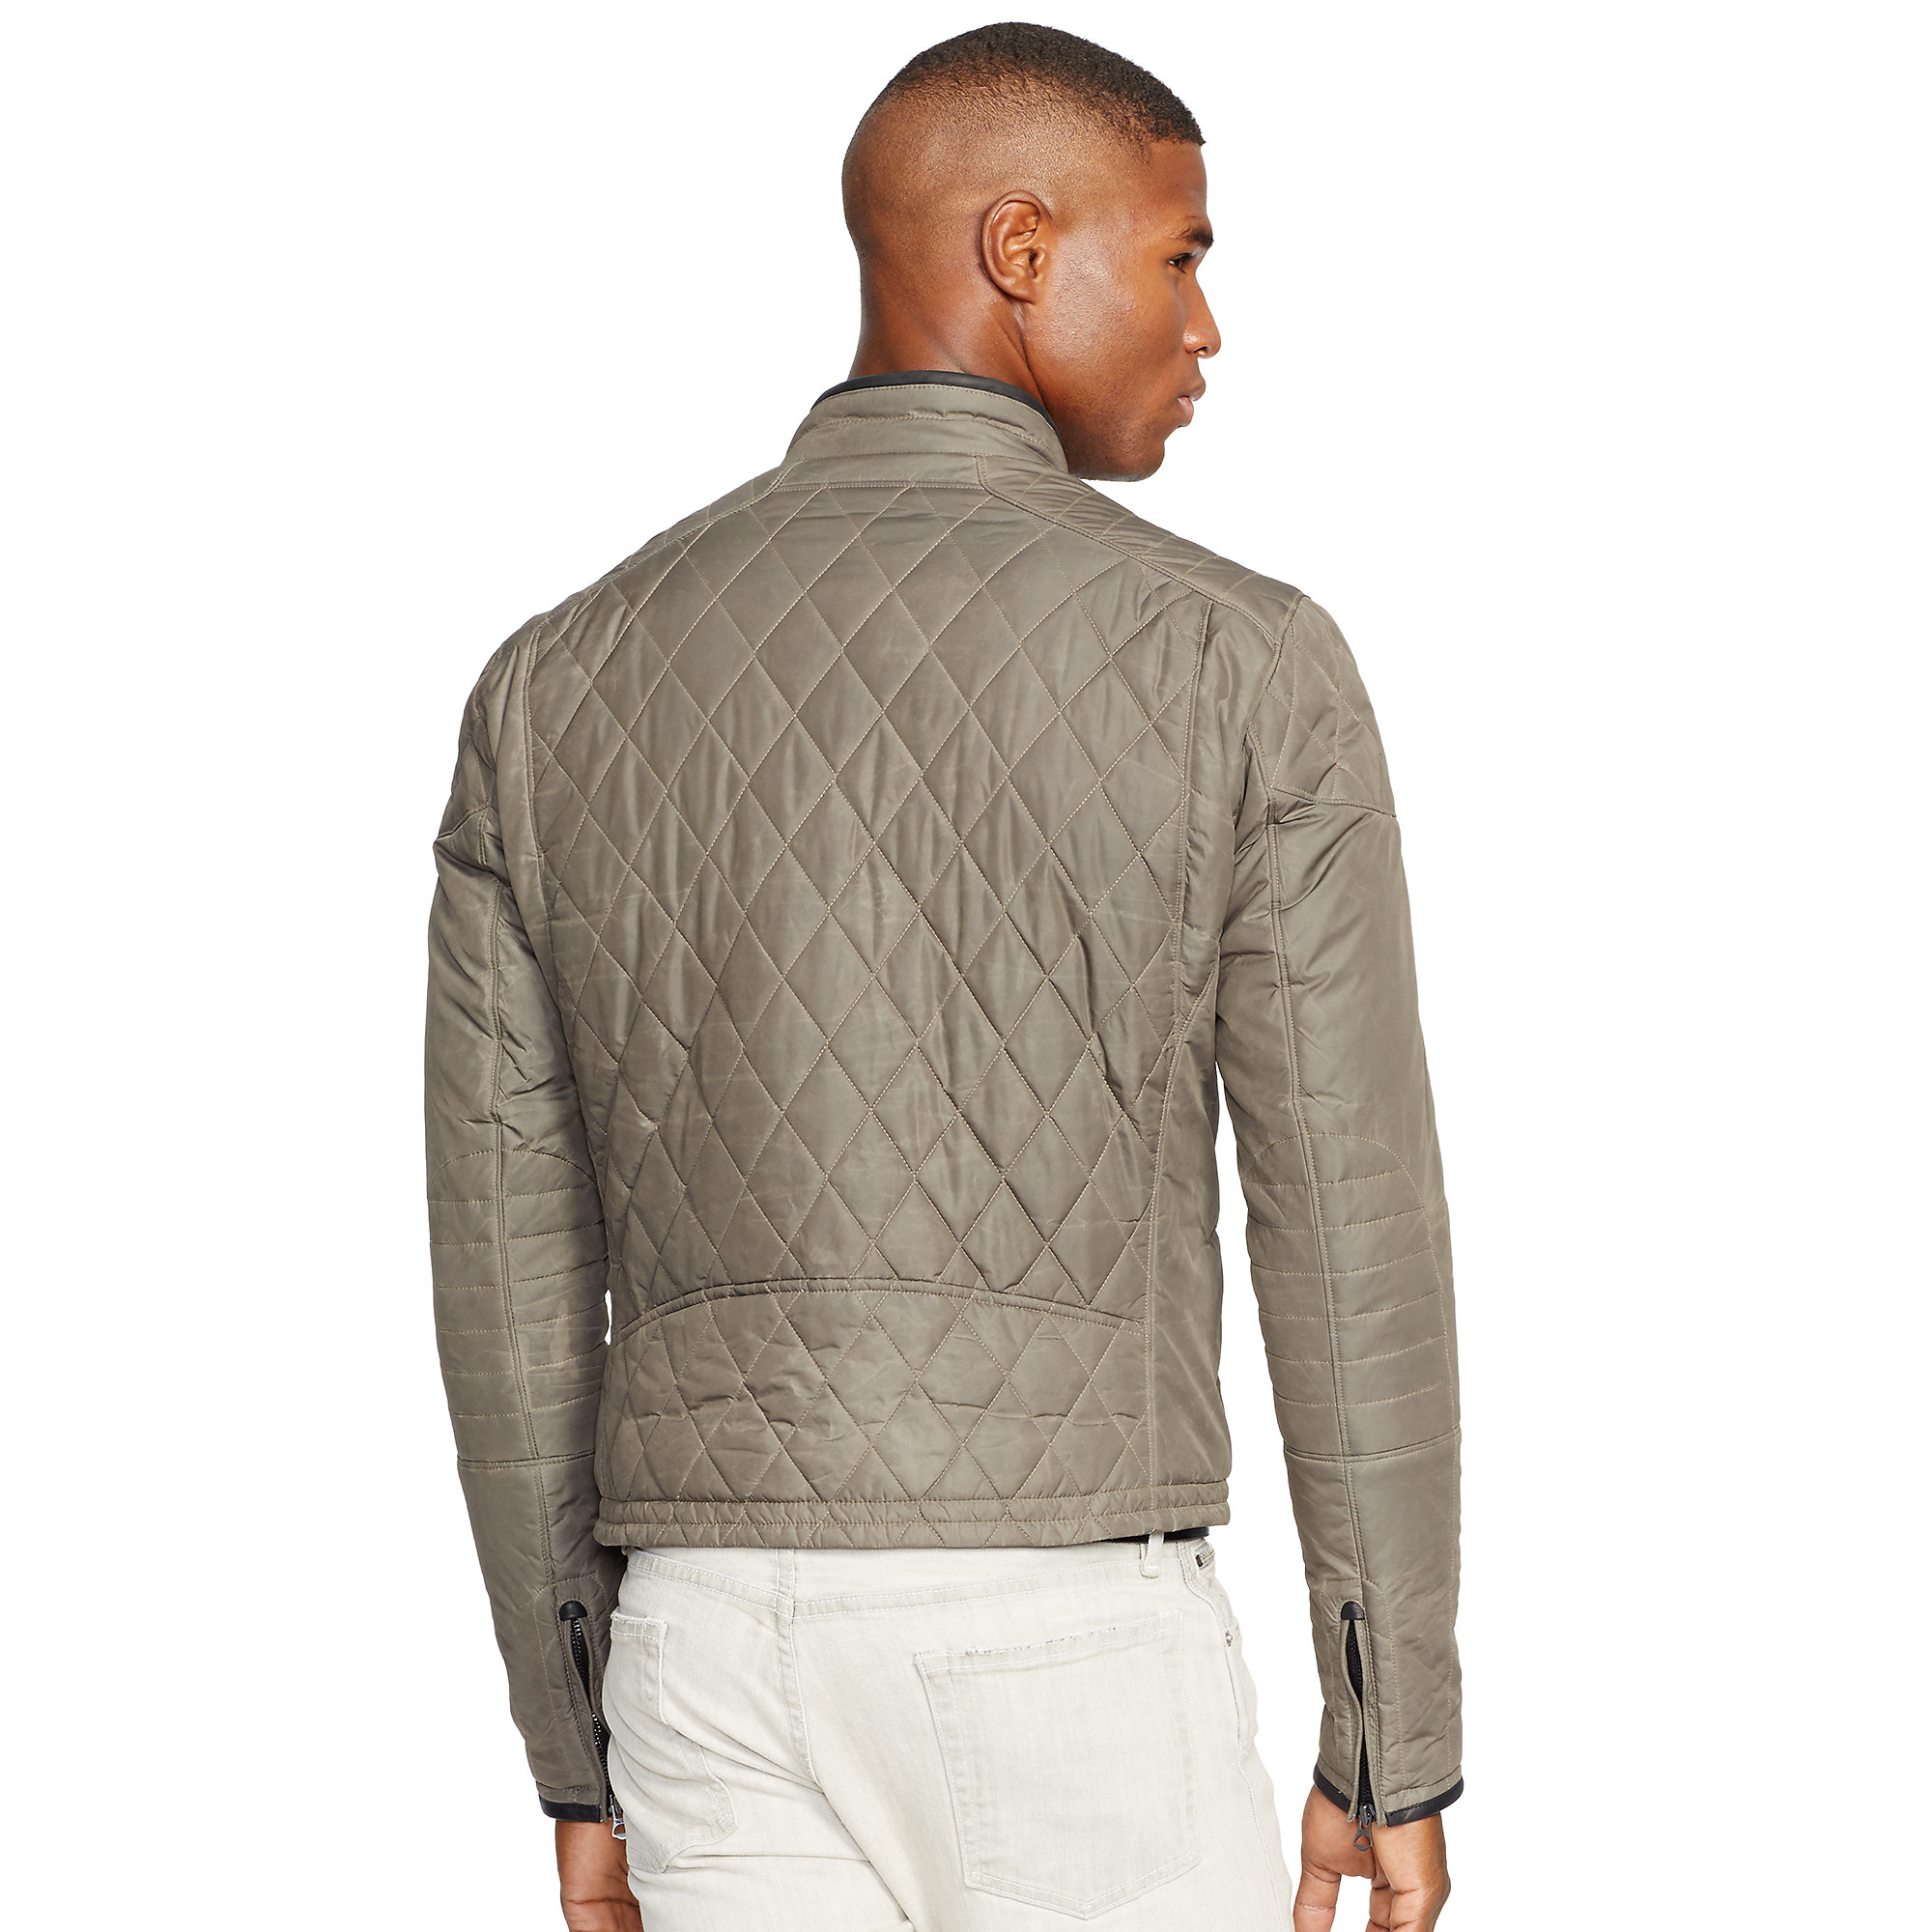 Polo Ralph Lauren Leather Quilted Biker Jacket in Gray for Men - Lyst